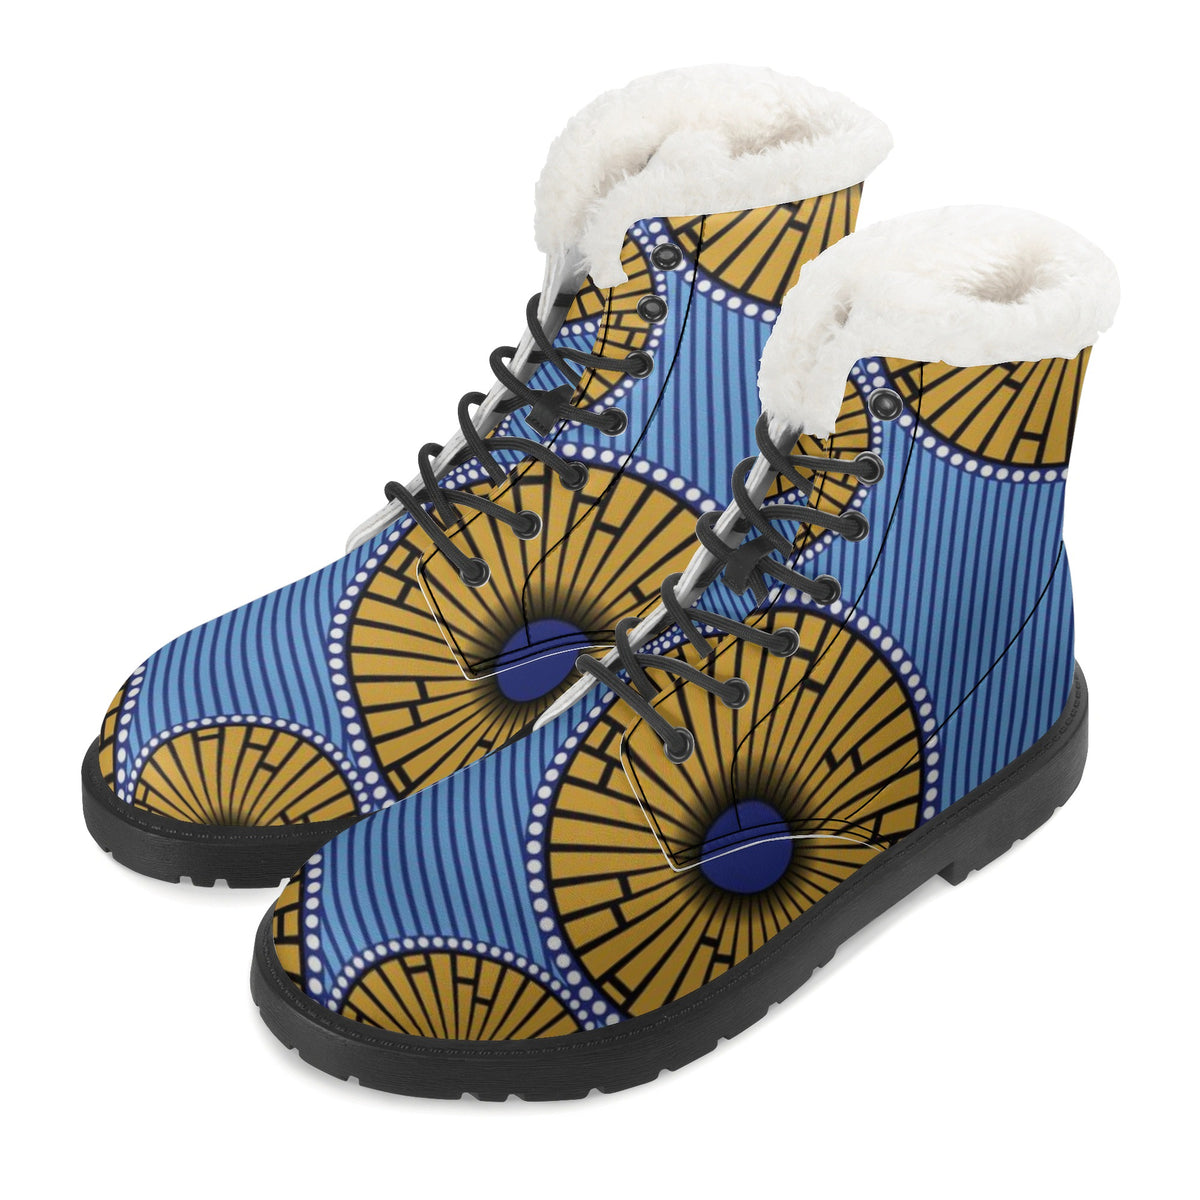 Gray Men's Faux Fur Leather Boots in Beautiful African Ankara Prints with vibrant colors Sumbu African Ankara Prints and Designs